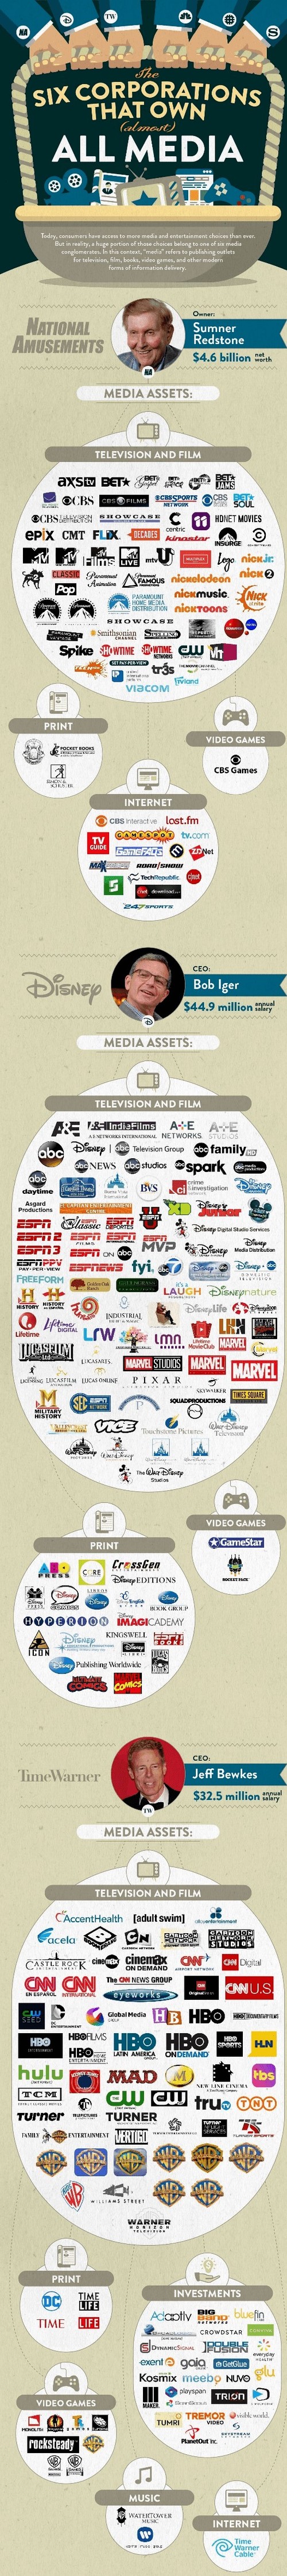 the-6-companies-that-own-almost-all-media1.jpg